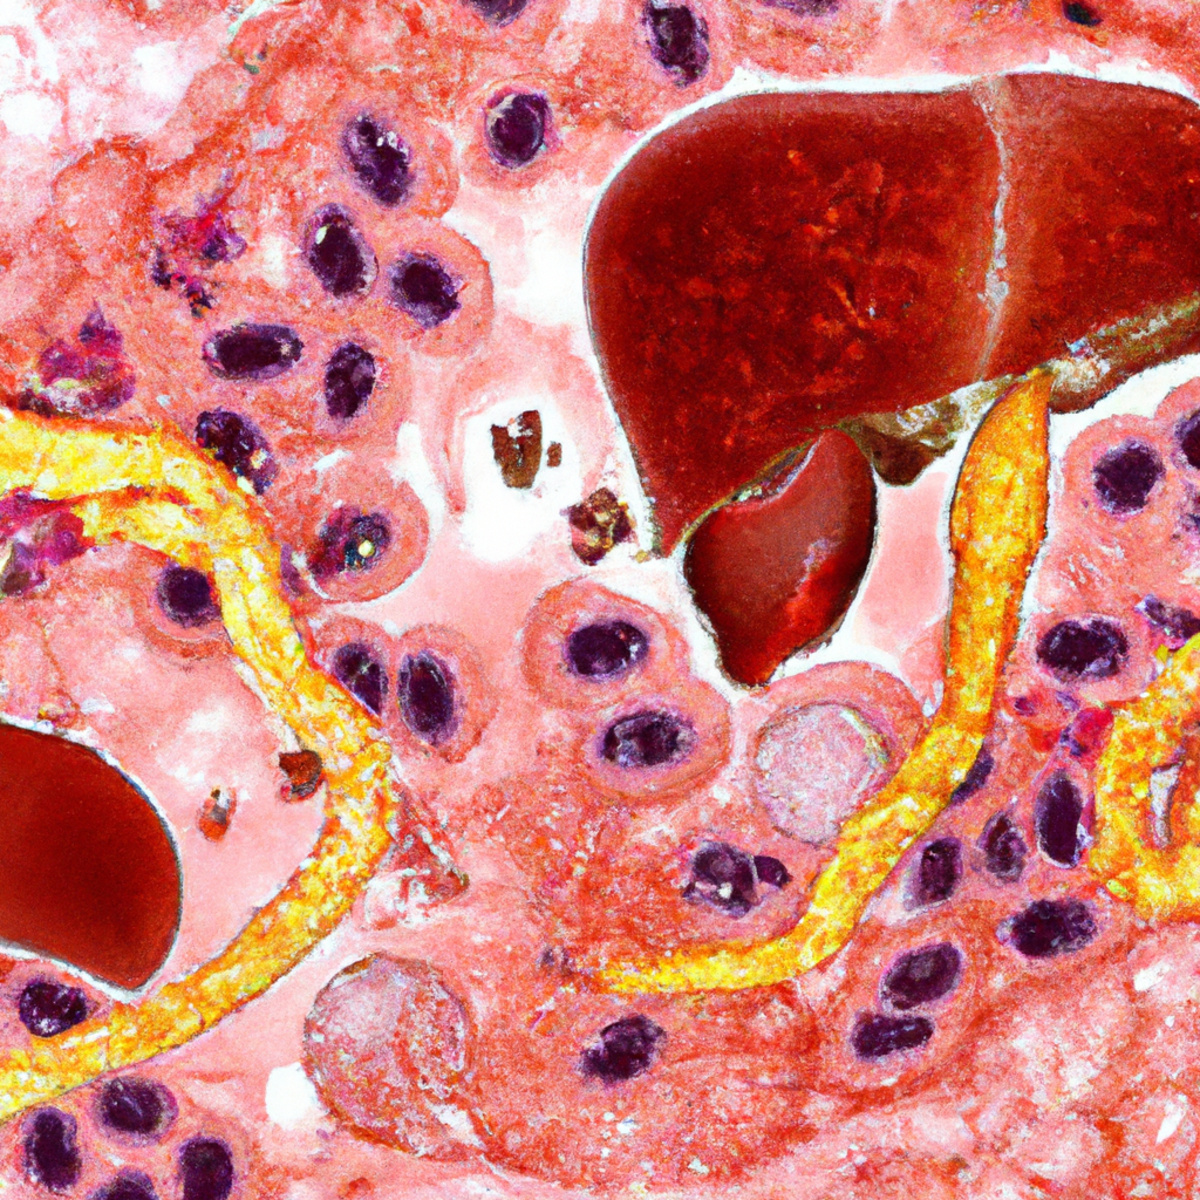 Close-up of healthy pancreas, showcasing intricate blood vessels and distinct cell arrangement, contrasting with abnormality. Vibrant colors and sharp details -  Nesidioblastosis